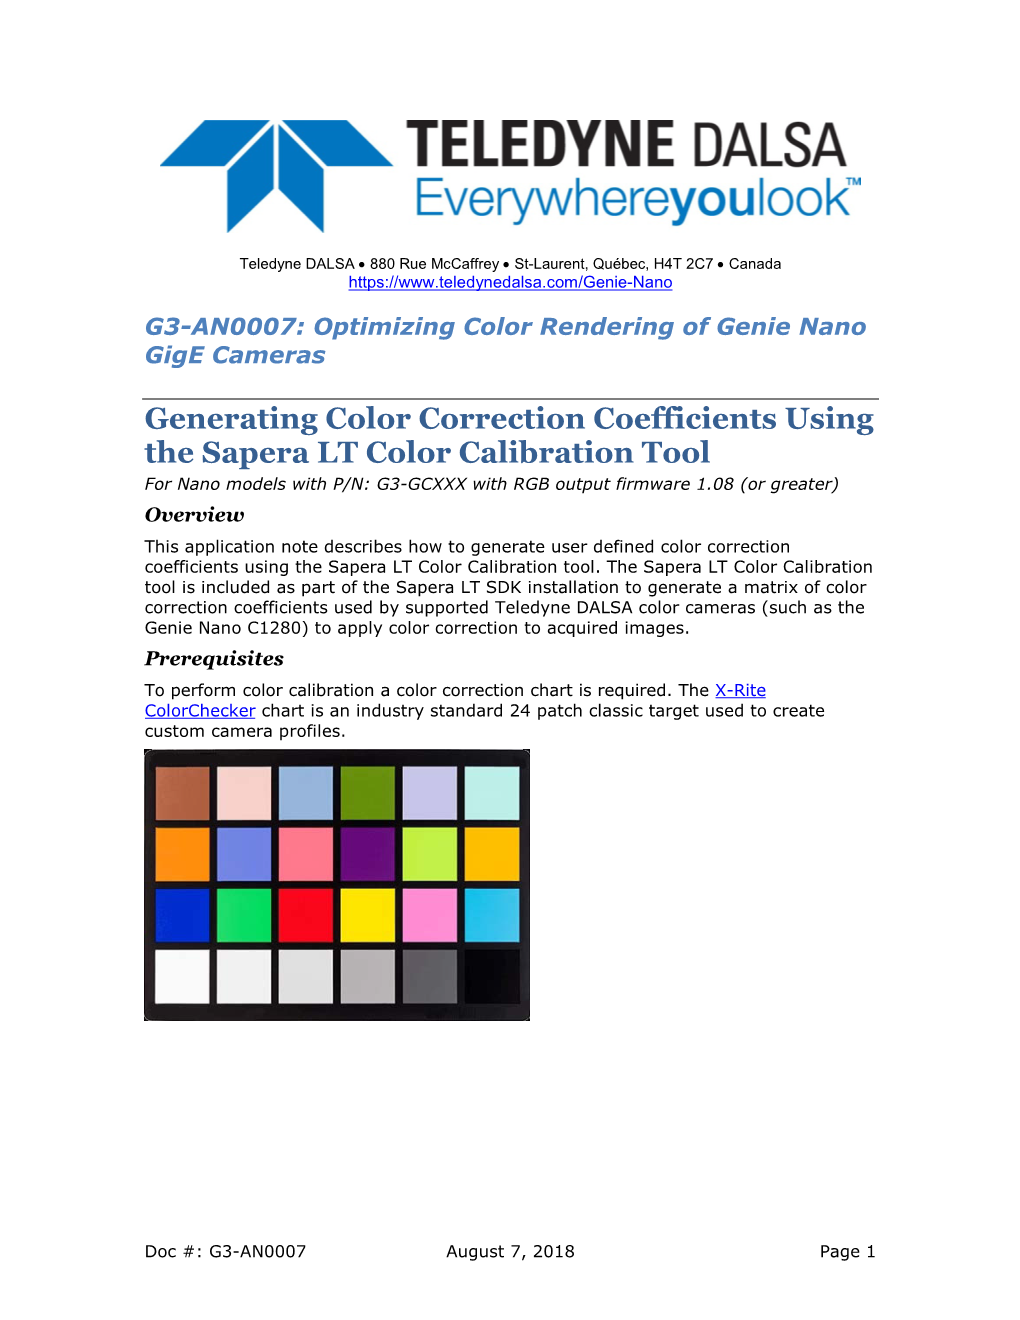 Generating Color Correction Coefficients Using the Sapera LT